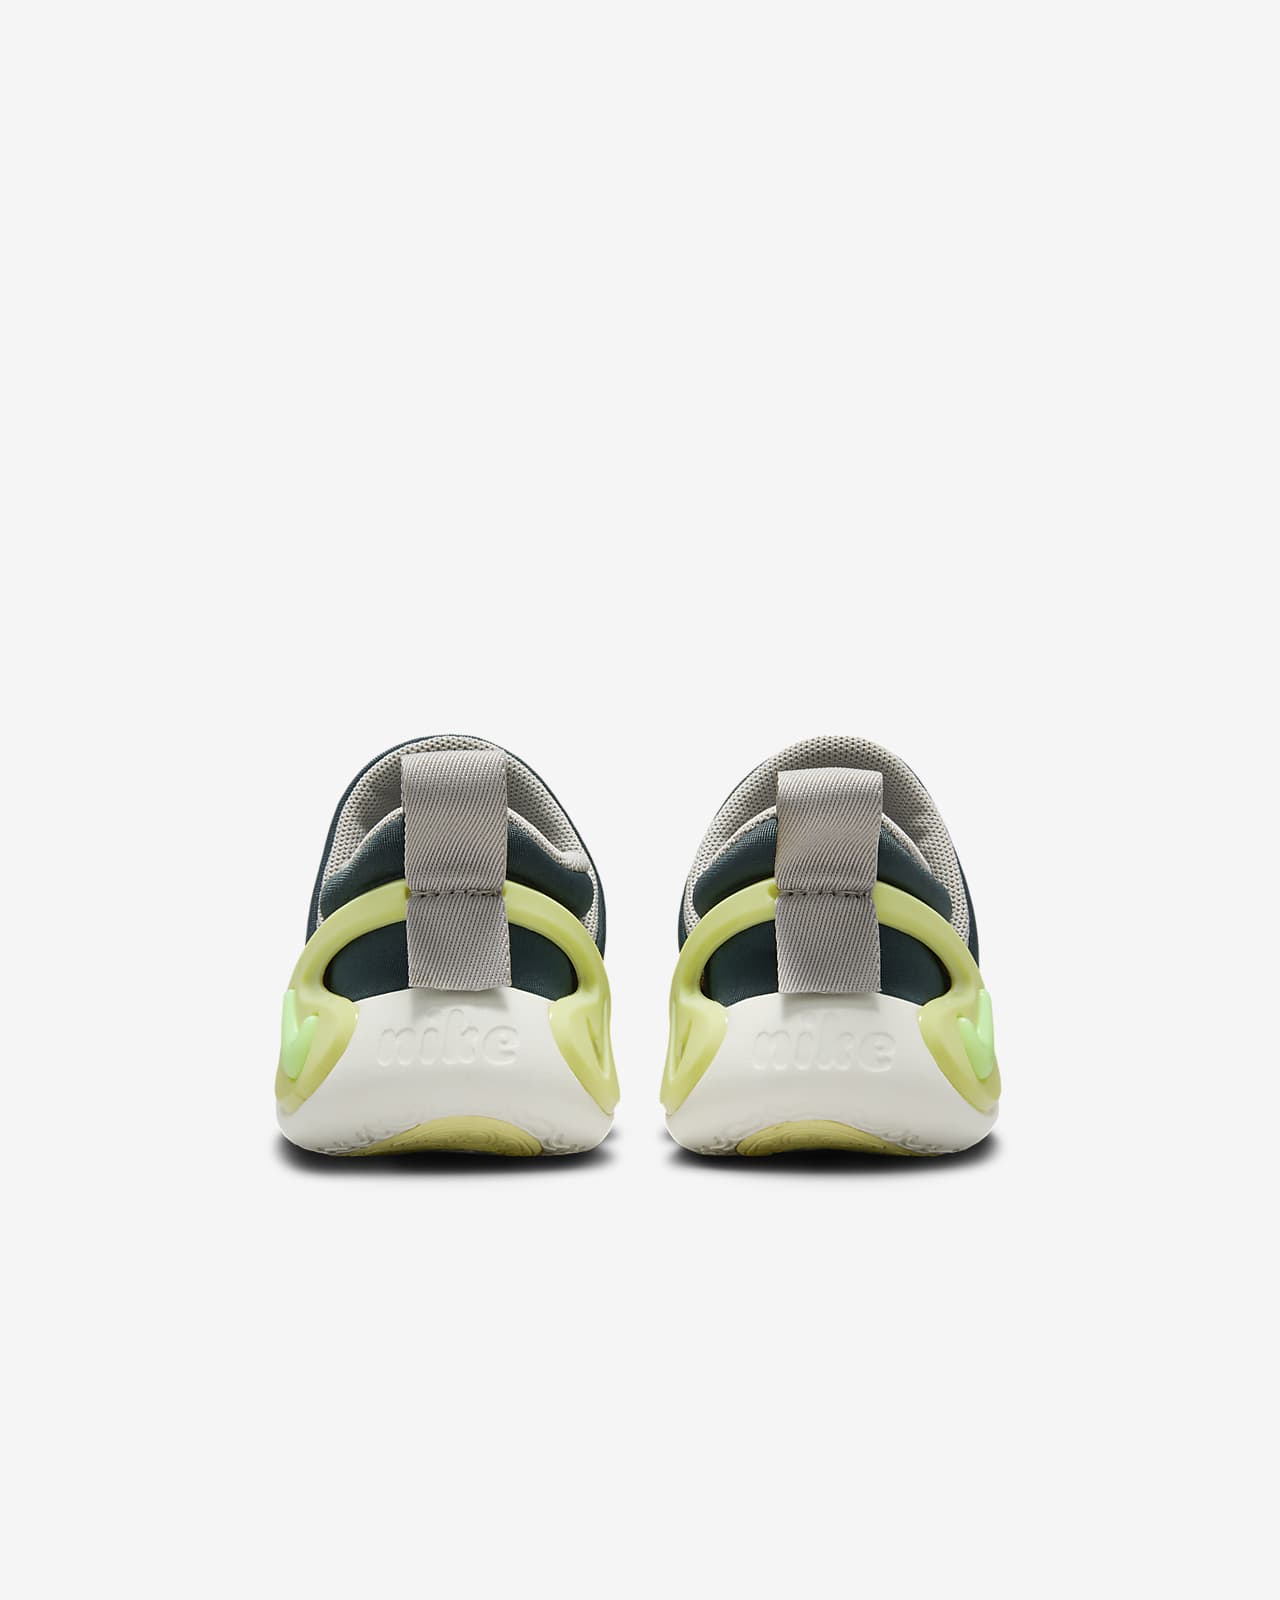 Nike Dynamo Go FlyEase Baby/Toddler Easy On/Off Shoes